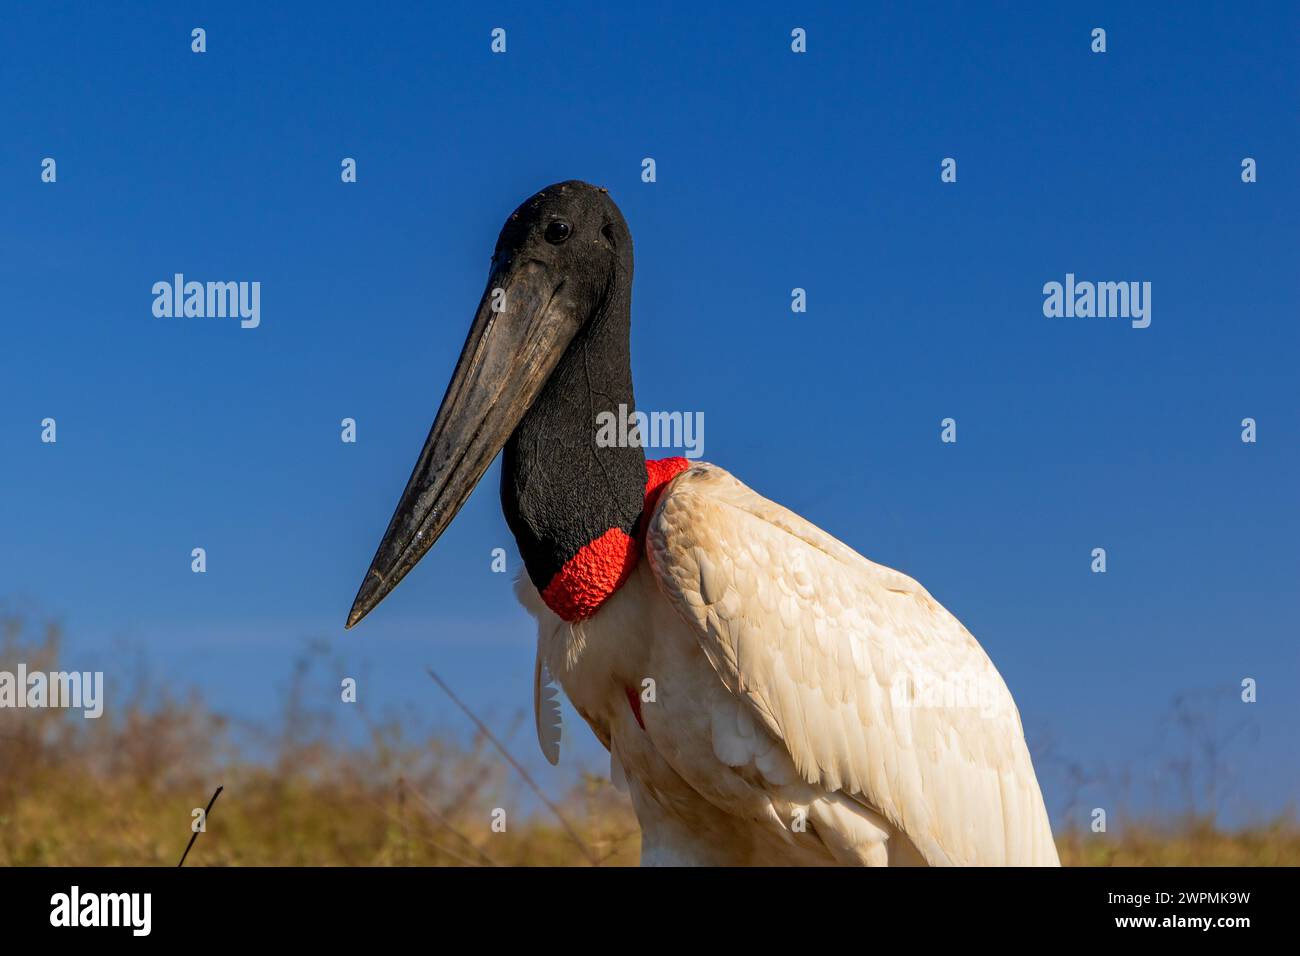 Close up of a Jaribu Stork agaianst a bright blue sky in the Pantanal, Brazil Stock Photo